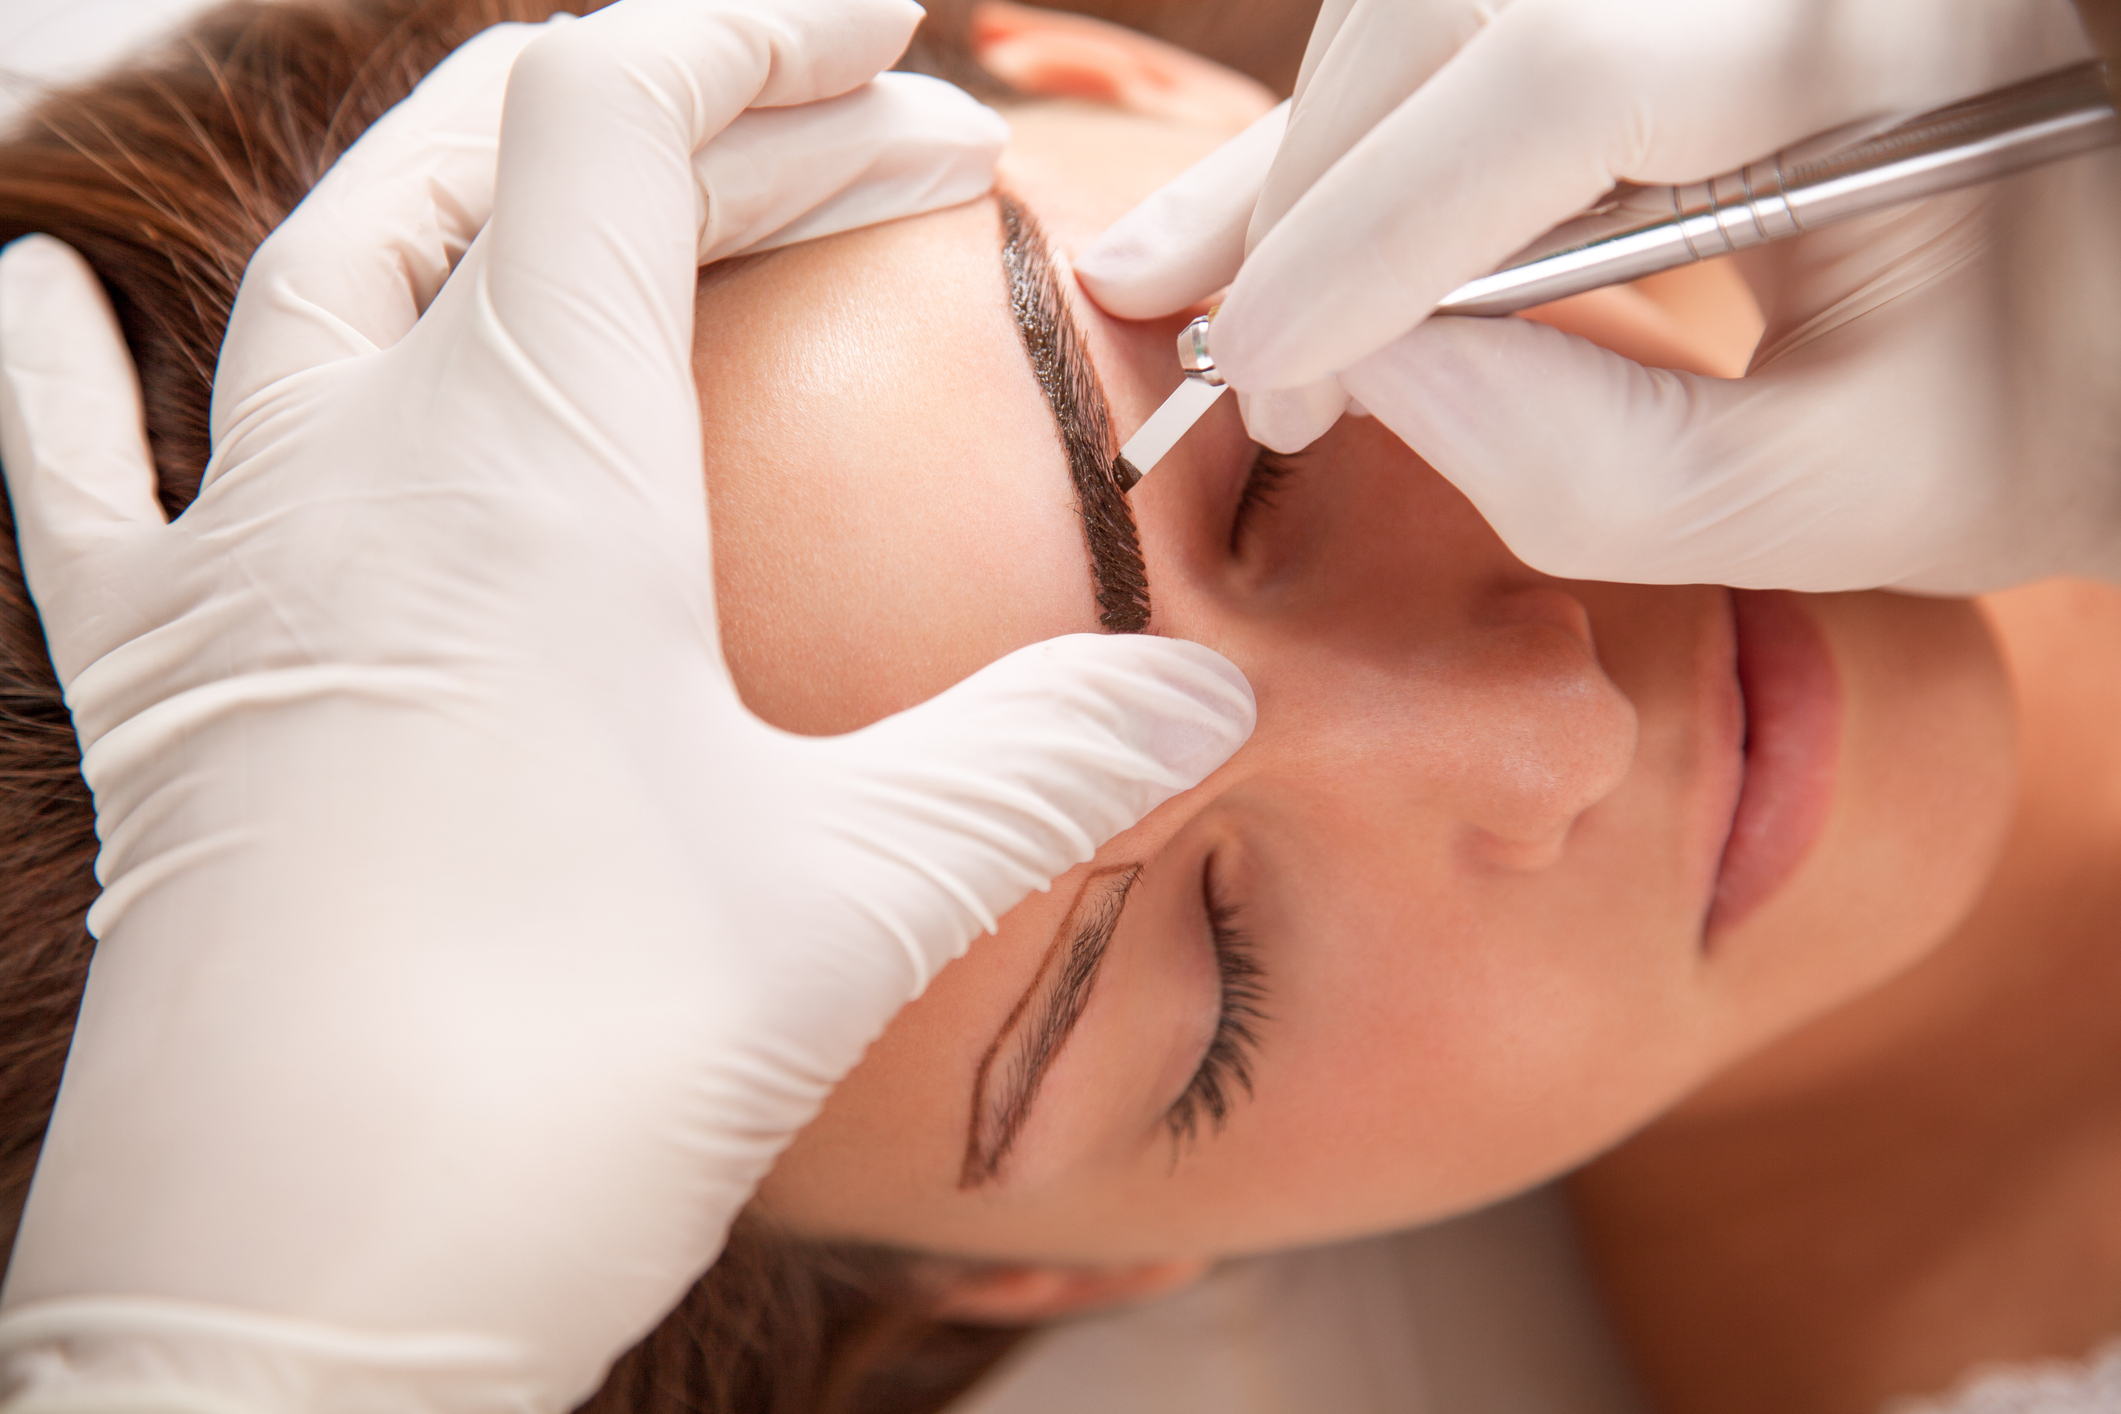 Advanced aesthetic services offered in a private and luxurious setting.